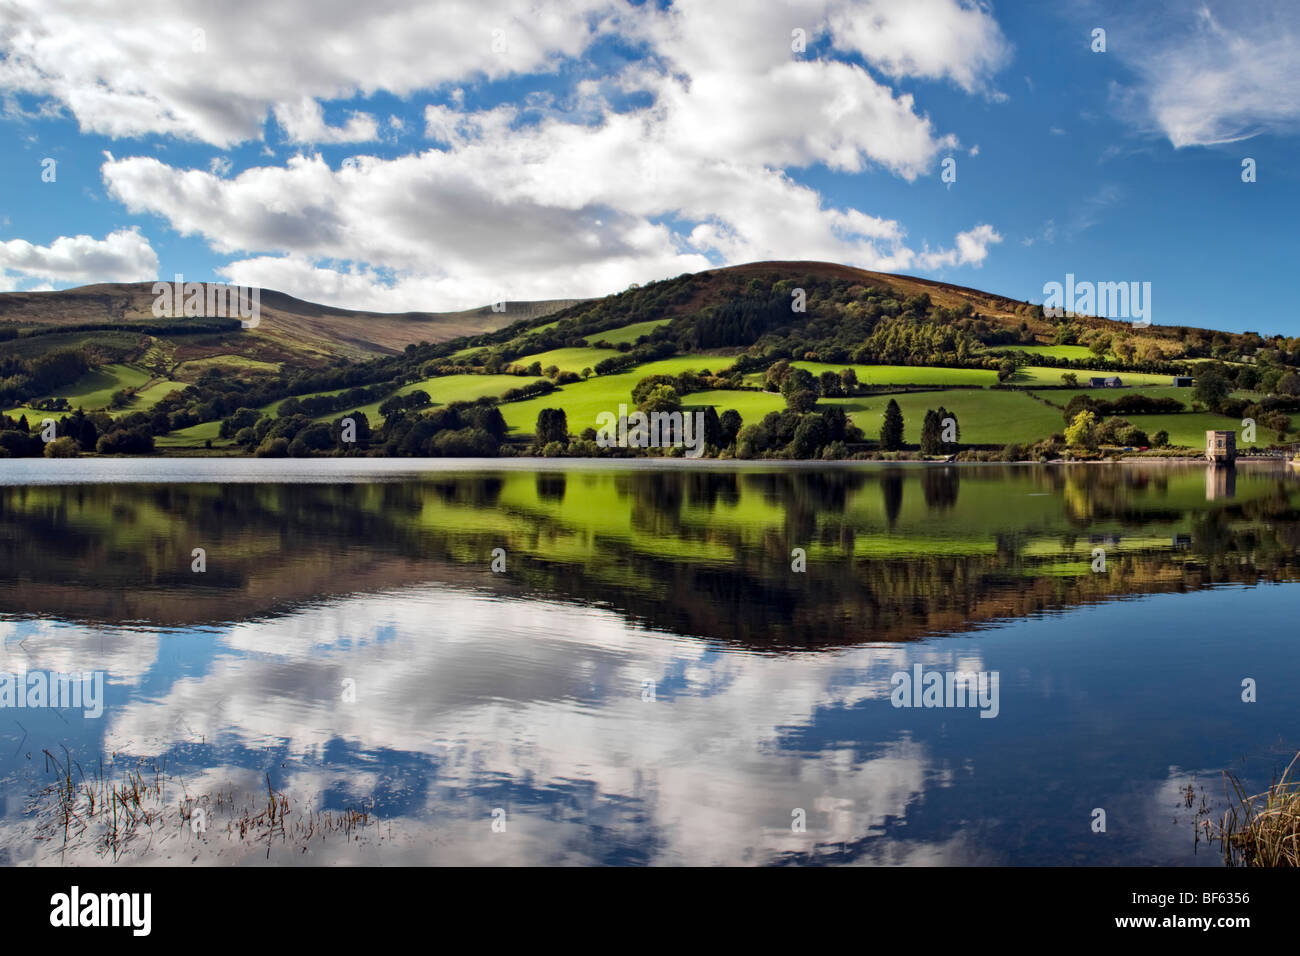 Perfect reflection at Talybont reservoir, Brecon Beacons in Wales taken on beautiful bright sunny day Stock Photo